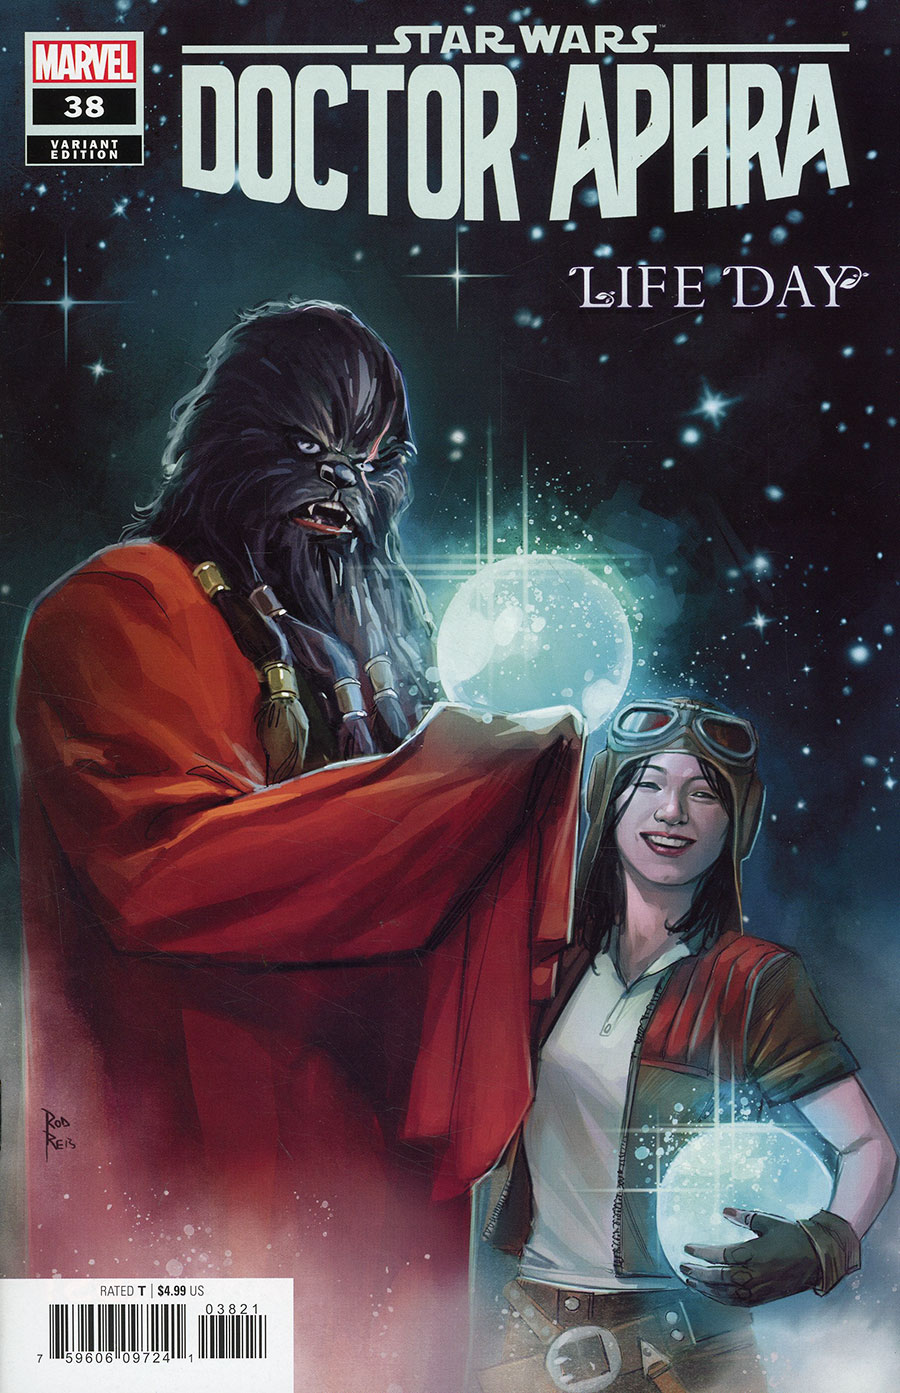 Star Wars Doctor Aphra Vol 2 #38 Cover B Variant Rod Reis Life Day Cover (Dark Droids Tie-In)